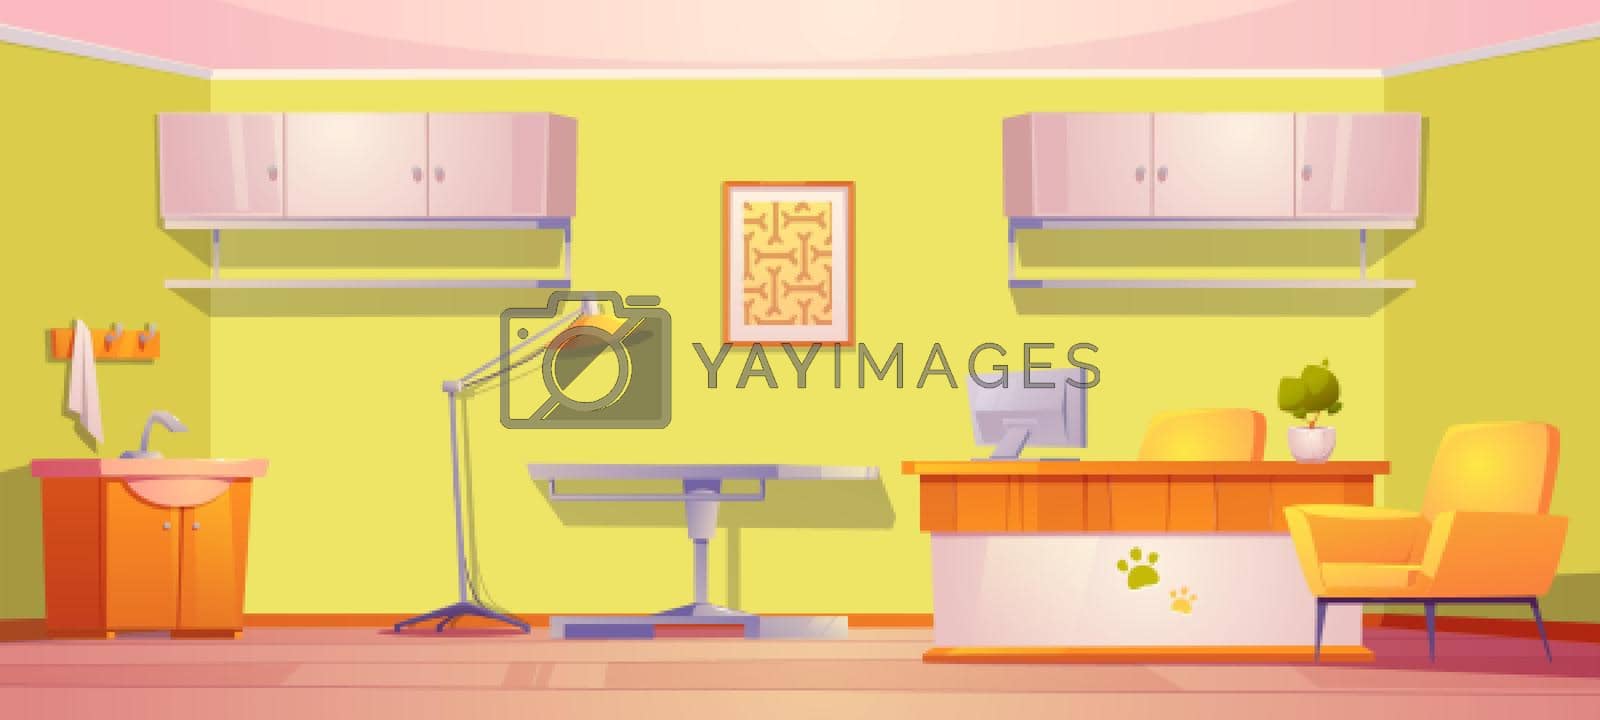 Vet clinic room for medical aid and exam pets. Vector cartoon interior of veterinarian office with doctor desk with computer, table with lamp for examine domestic animals, sink and shelves